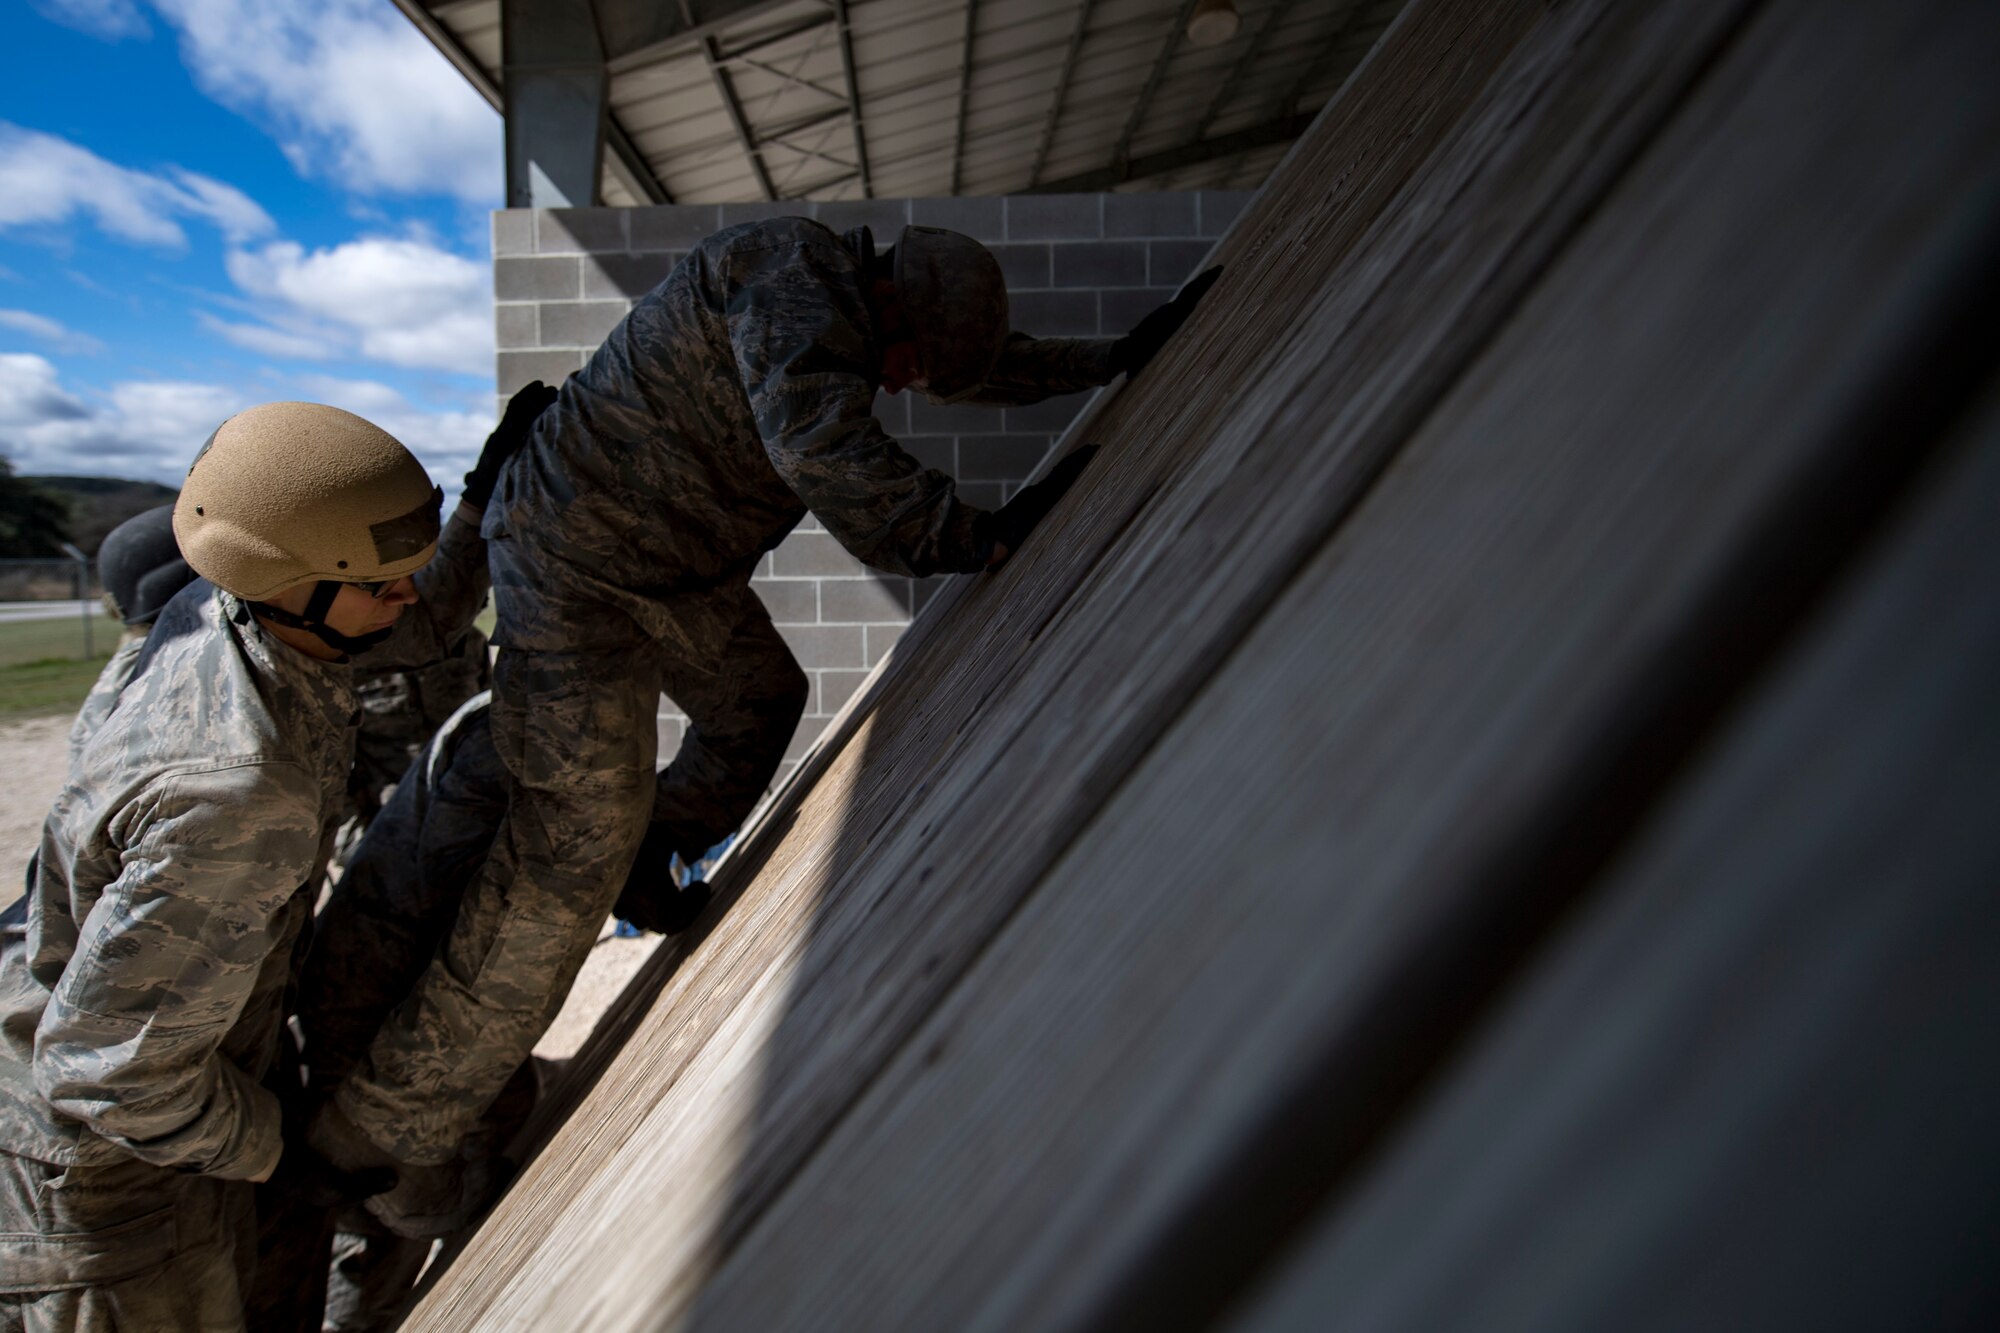 Air Force Academy cadets work to complete a tasked obstacle training during an Air Liaison Officer Aptitude Assessment, Feb. 14, 2017, at Camp Bullis, Texas. The cadets were forced to use critical thinking skills to complete tasked obstacles as a team. (U.S. Air Force photo by Airman 1st Class Daniel Snider)